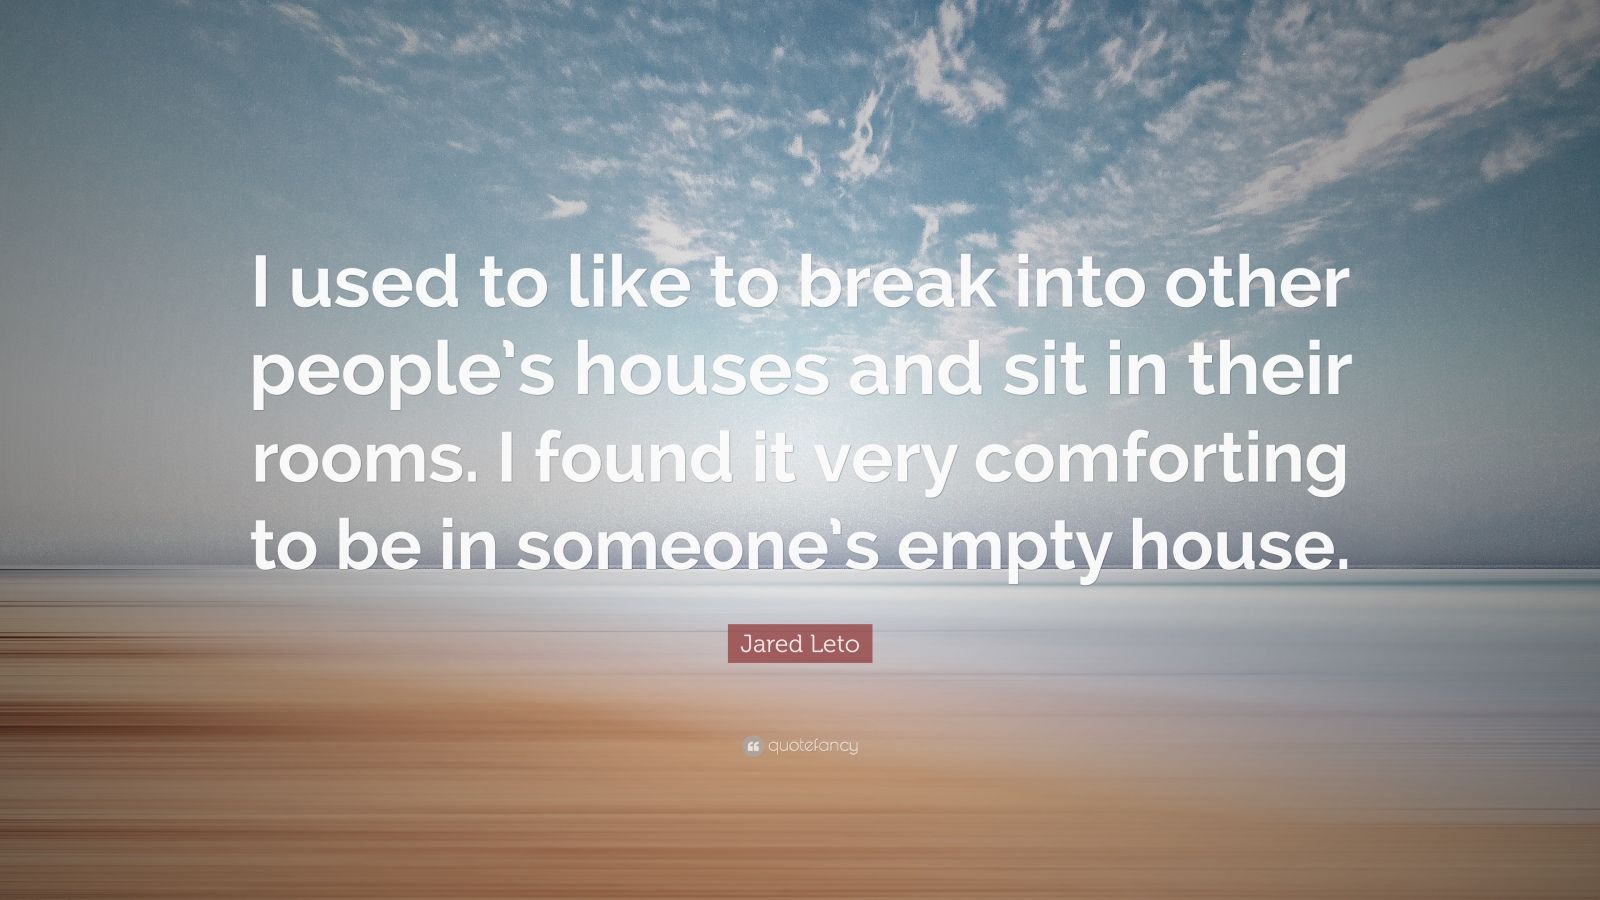 Jared Leto Quote: “I used to like to break into other people’s houses ...